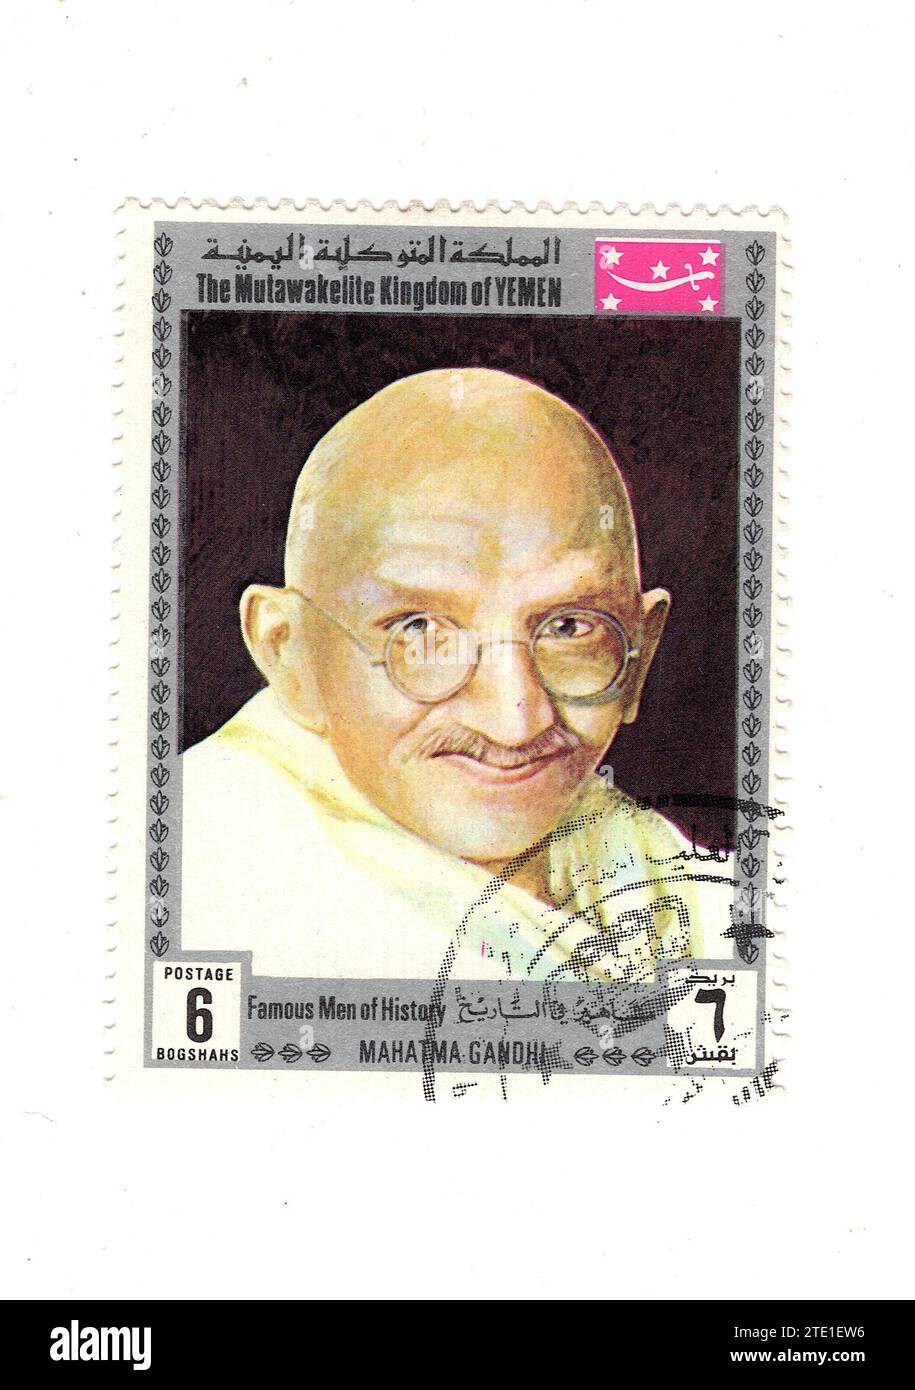 A vintage postage stamp from Yemen featuring a portrait of Mahatma Gandhi isolated on a white background. Stock Photo